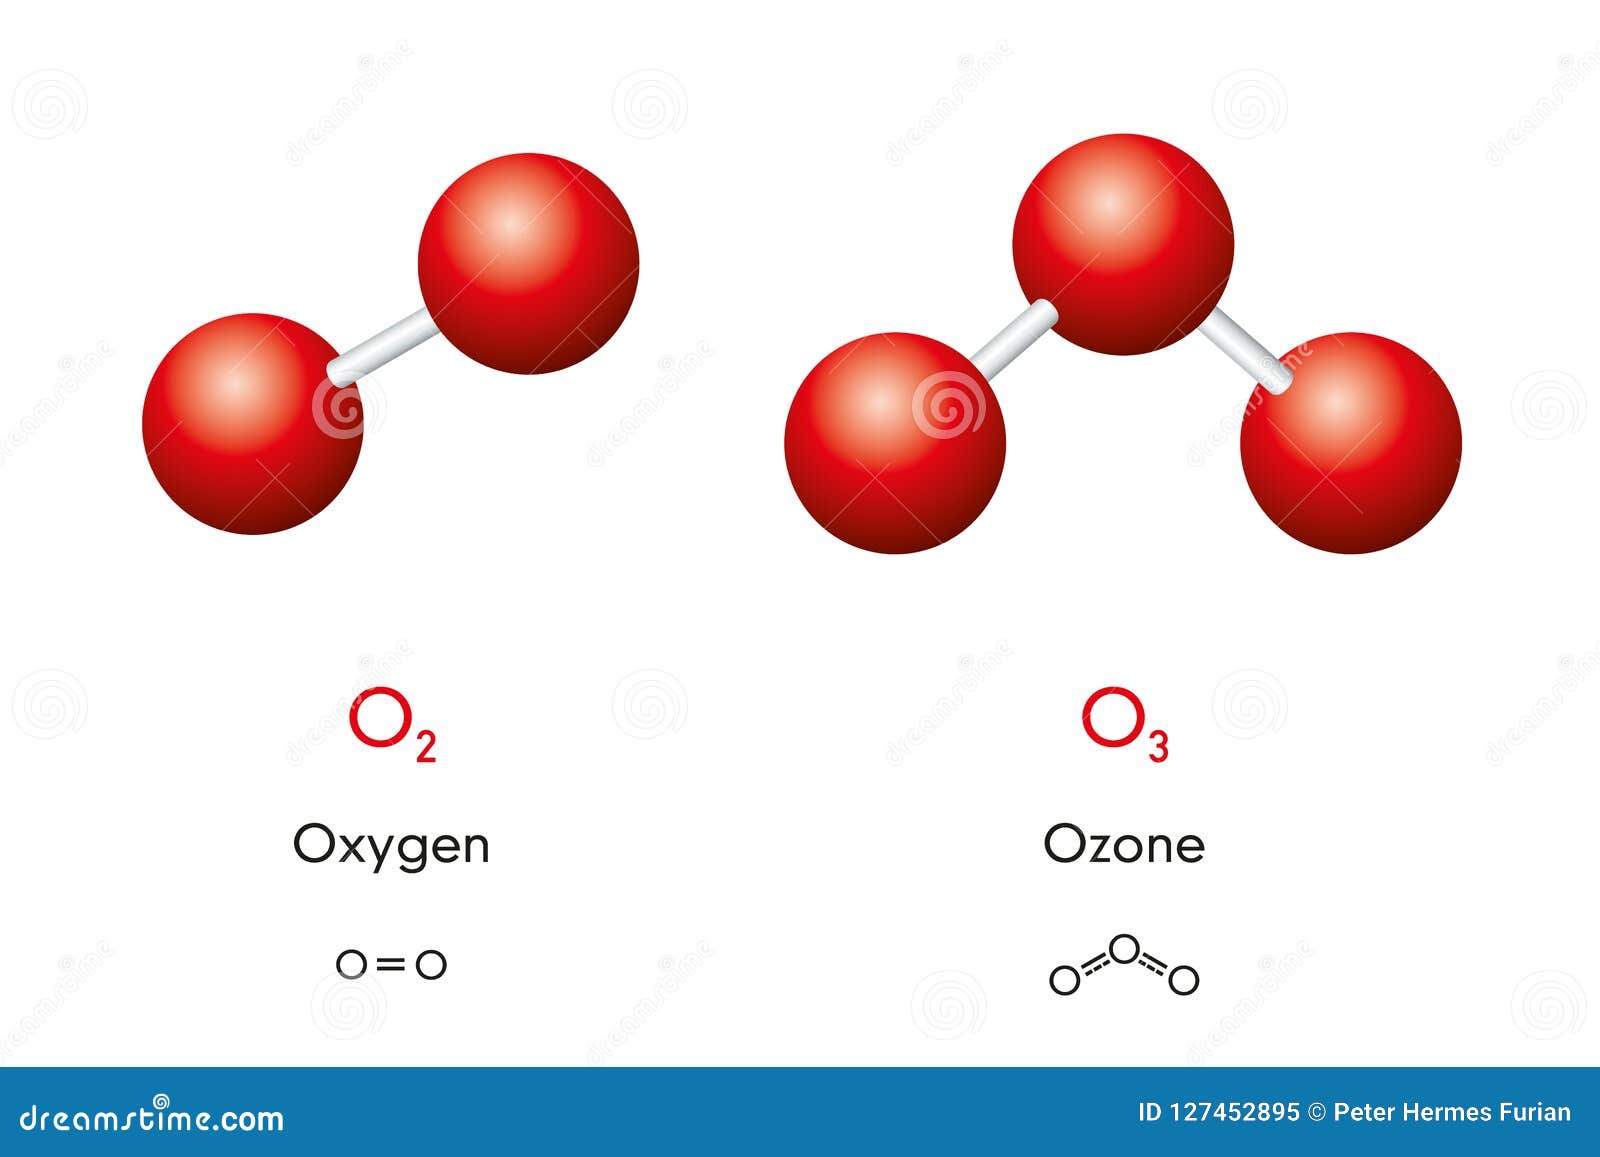 Oxygen And Ozone Molecule Models And Chemical Formulas Stock ...